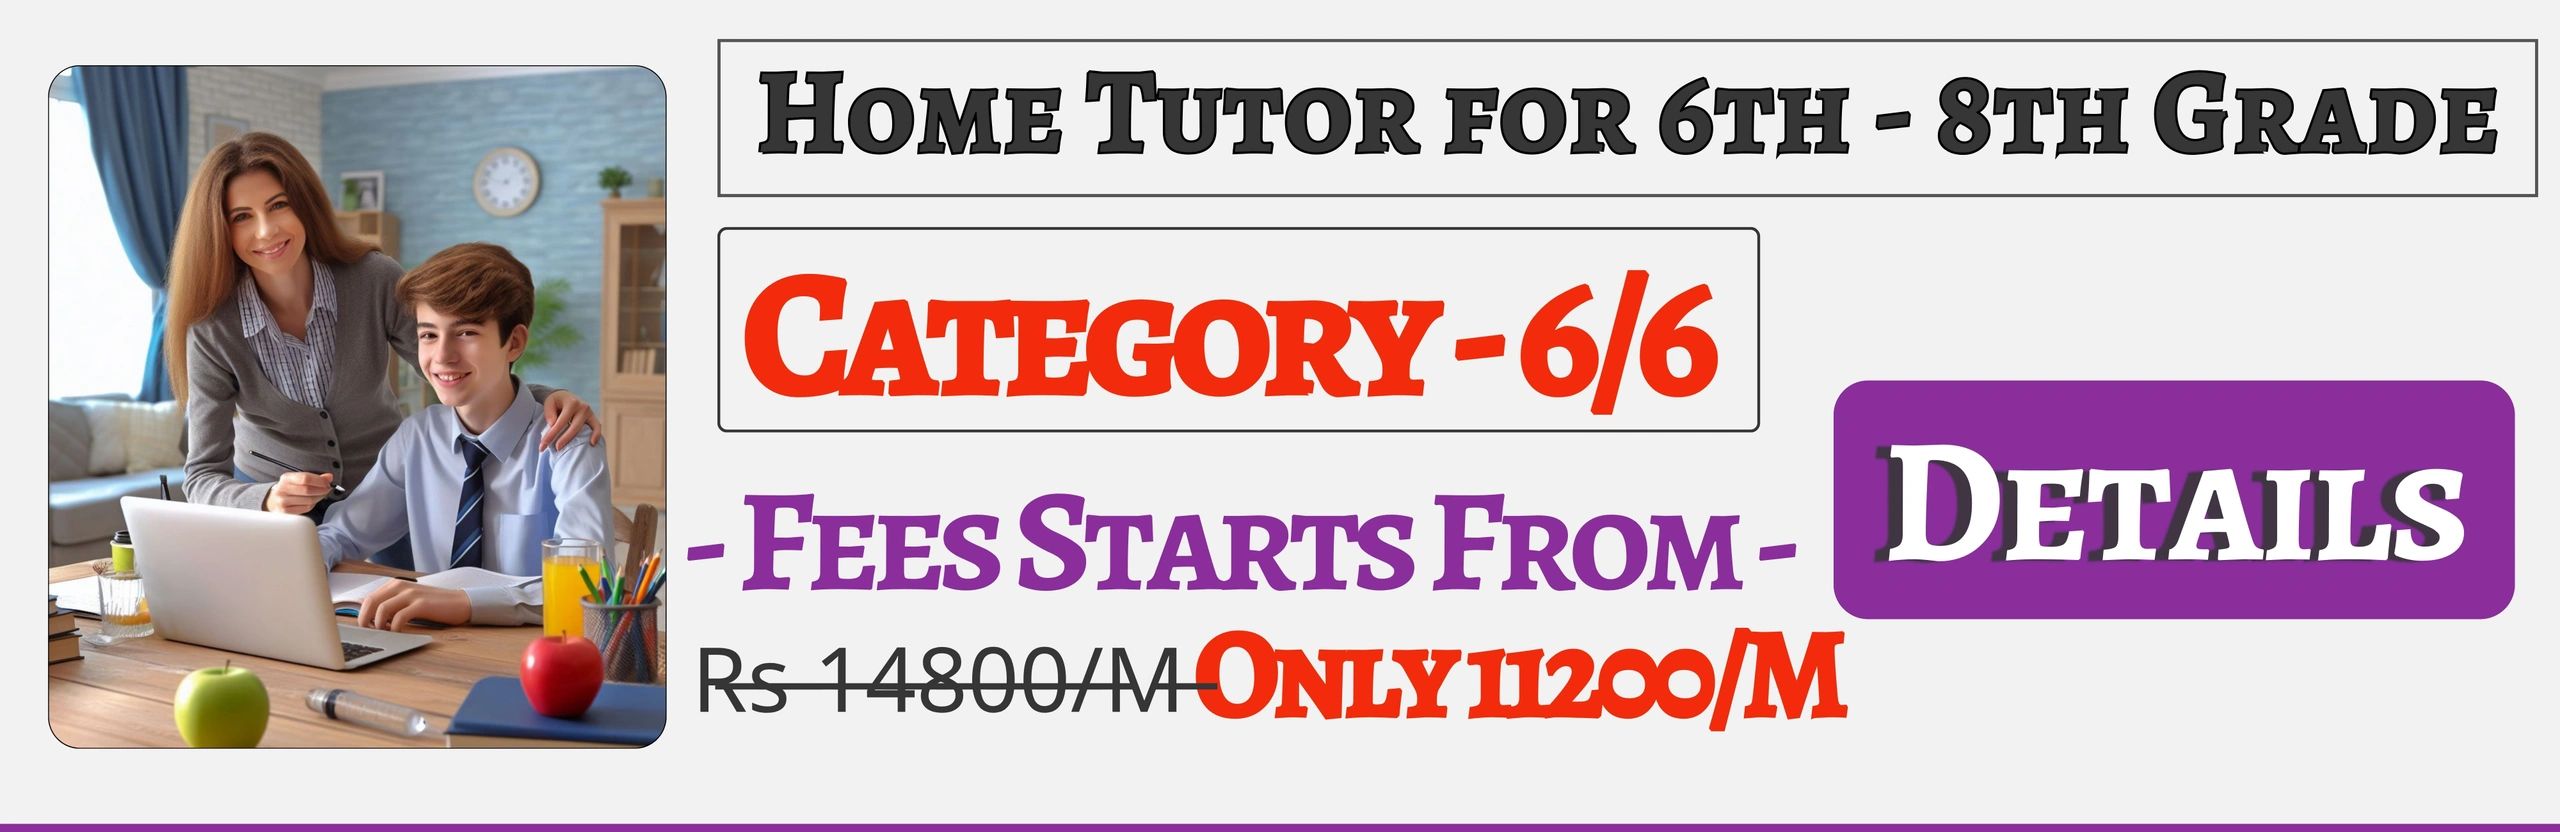 Book Best Home Tuition Tutors For 6th 7th & 8th In Jaipur Fees Only 11200/M